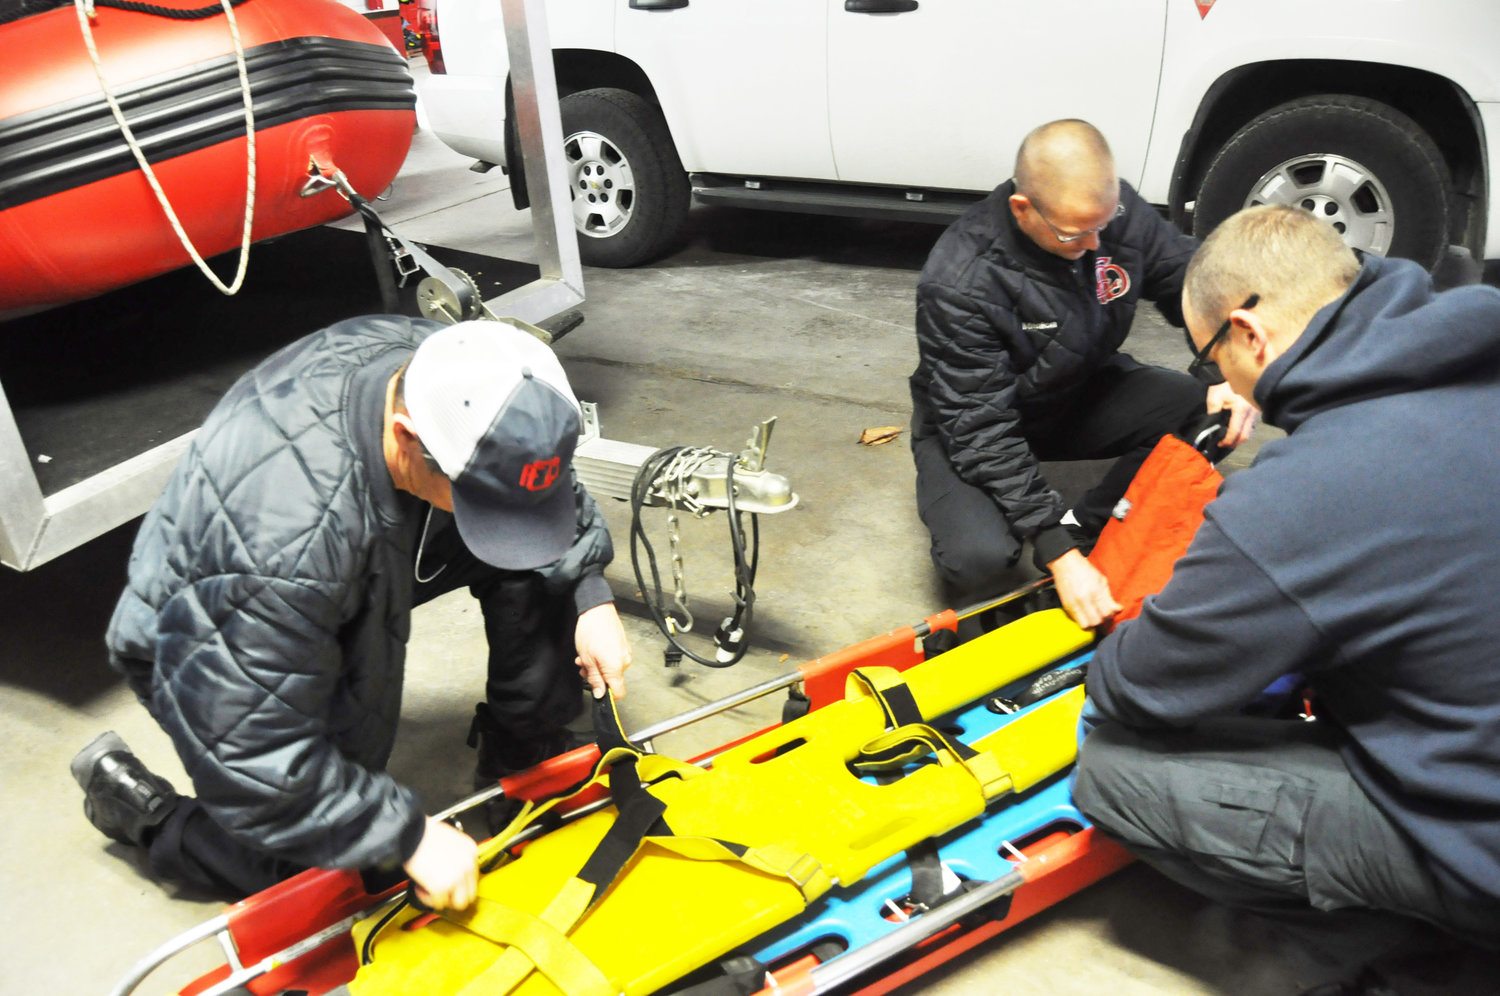 Crawfordsville firefighters, from left, Todd Fouty, James Manion and Jeremiah Thompson test a basket stretcher Tuesday at Crawfordsville Fire Station No. 1. The department has experienced a steady rise in emergency calls in recent years.